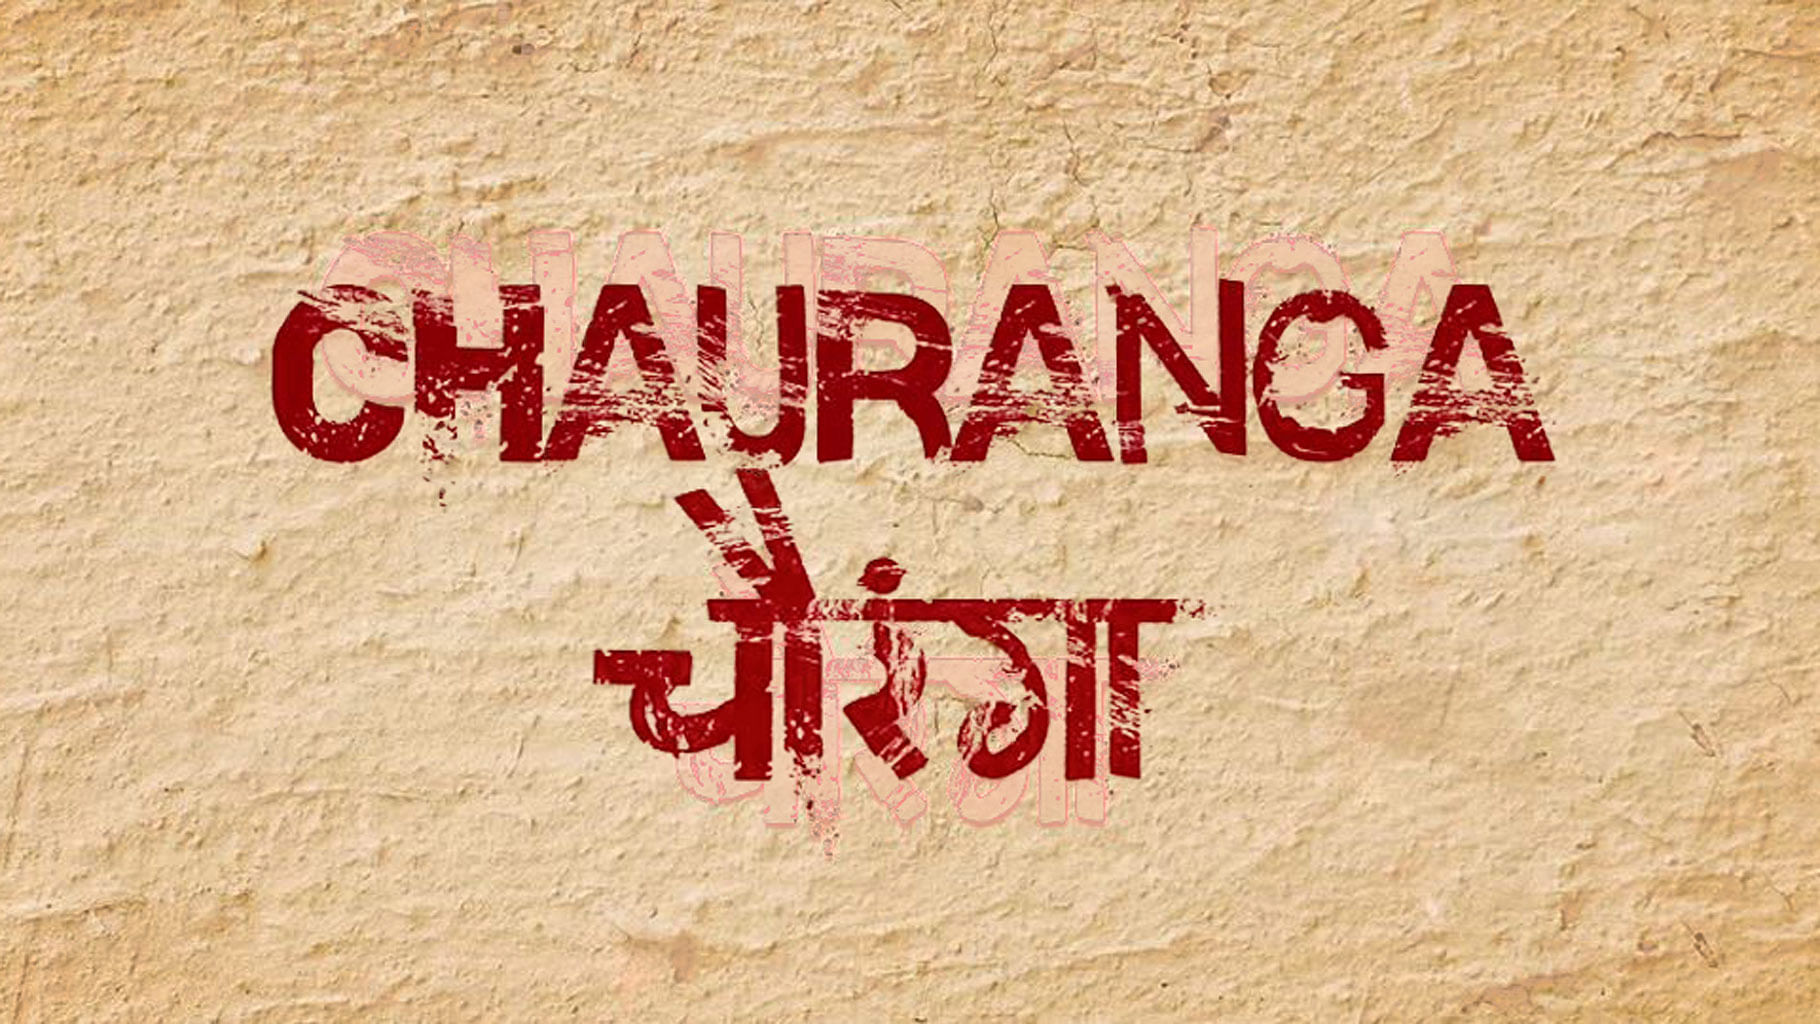 

If you have resolved to watch some intelligent sensible cinema then look no further, book your tickets for <i>Chauranga</i>. (Screengrab from <i>Chauranga</i>’s <a href="https://www.youtube.com/watch?v=Nu50meFTNU4">trailer</a>)